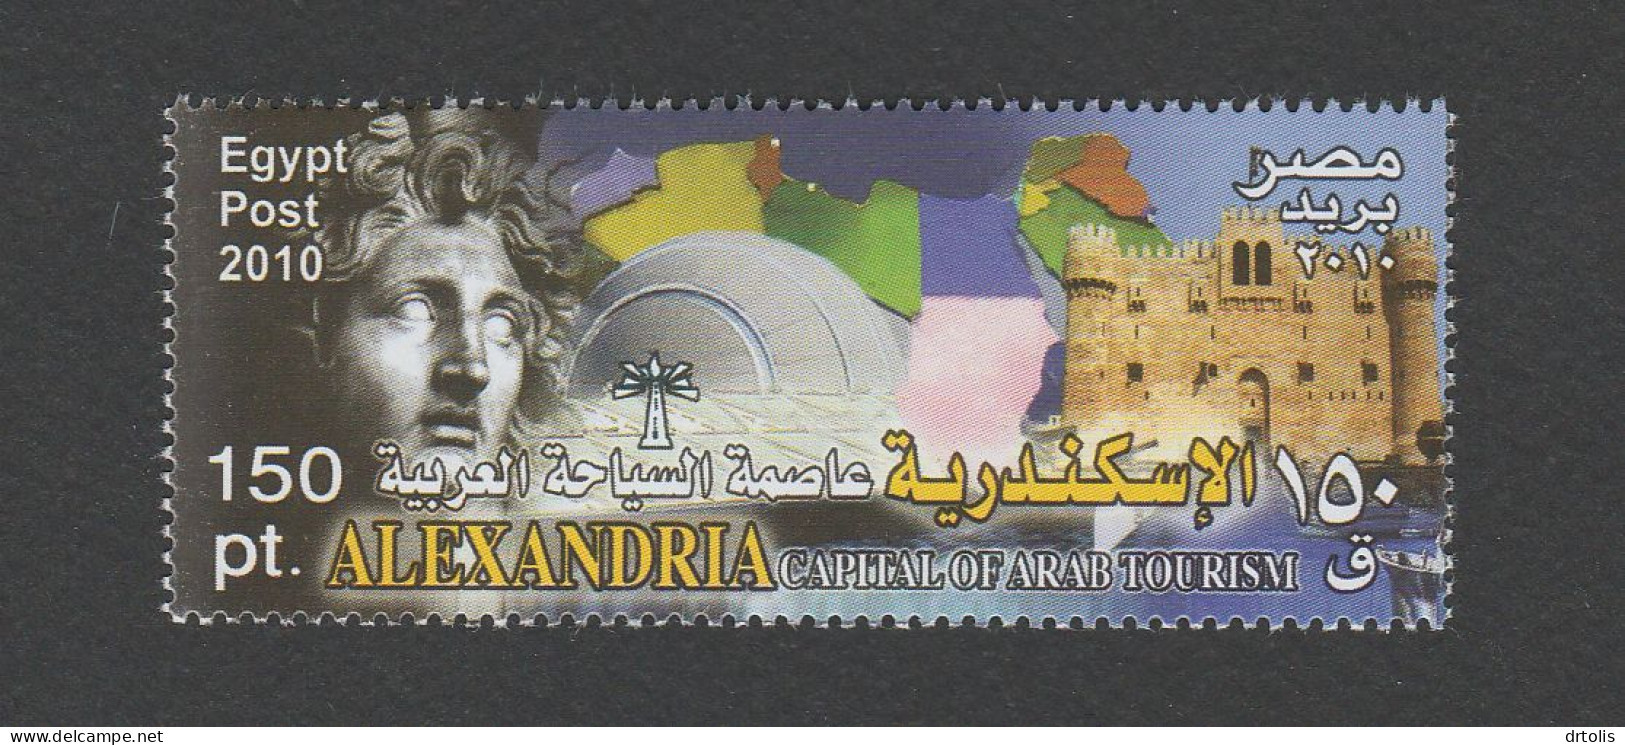 EGYPT / 2010 / ALEXANDRIA - CAPITAL FOR ARAB TOURISM / ALEX  LIGHTHOUSE- LIBRARY / MAP OF ARAB COUNTRIES / MNH / VF  . - Ungebraucht